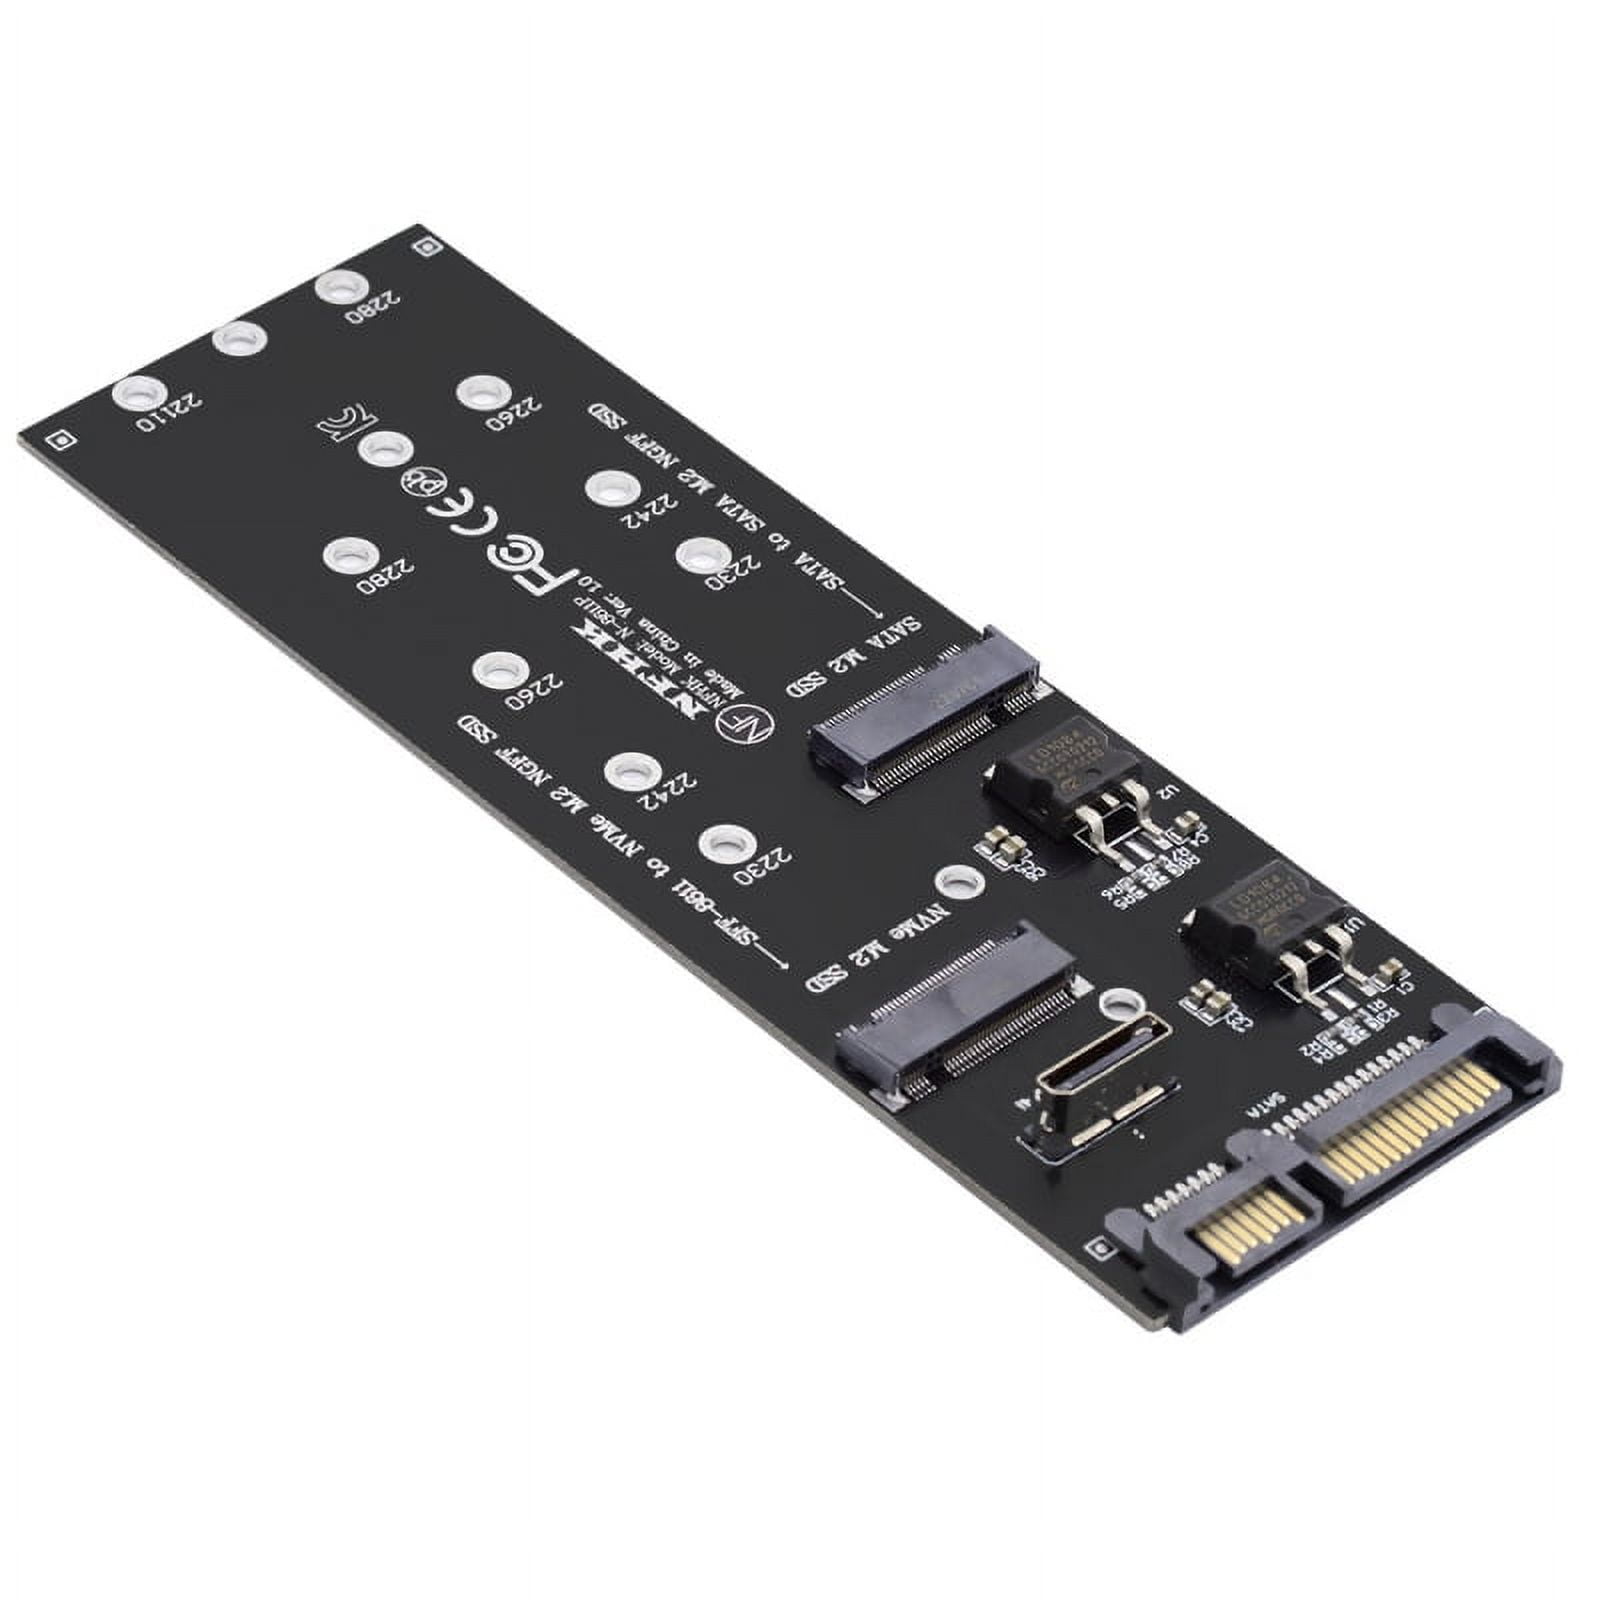 JSER Oculink SFF-8612 8611 to U.2 Kit M-Key to NVME PCIe SSD and